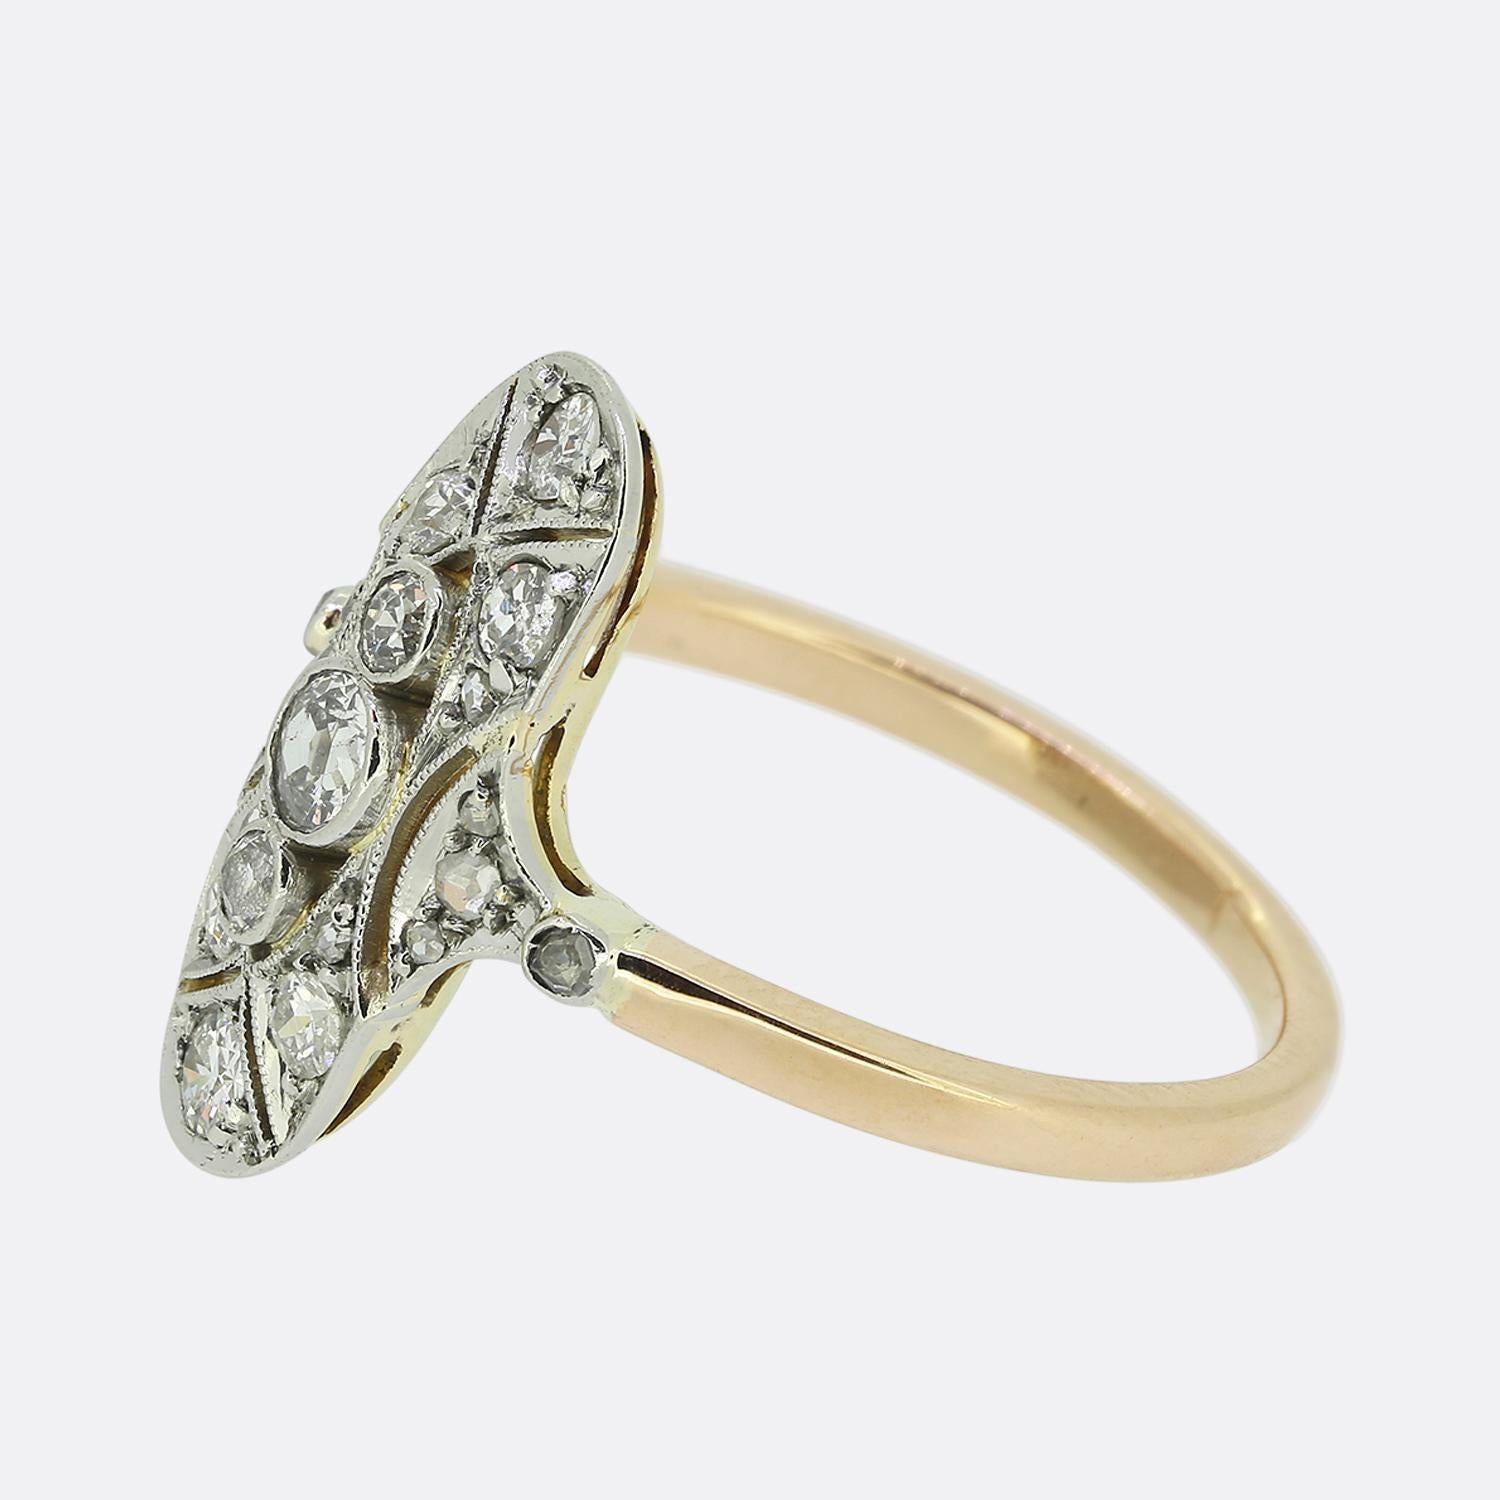 Here we have a delightful diamond navette ring dating back to the Edwardian period. At the centre of the face we find three round faceted old European cut diamonds in a vertical formation. This trio sits slightly risen atop a platinum pierced open